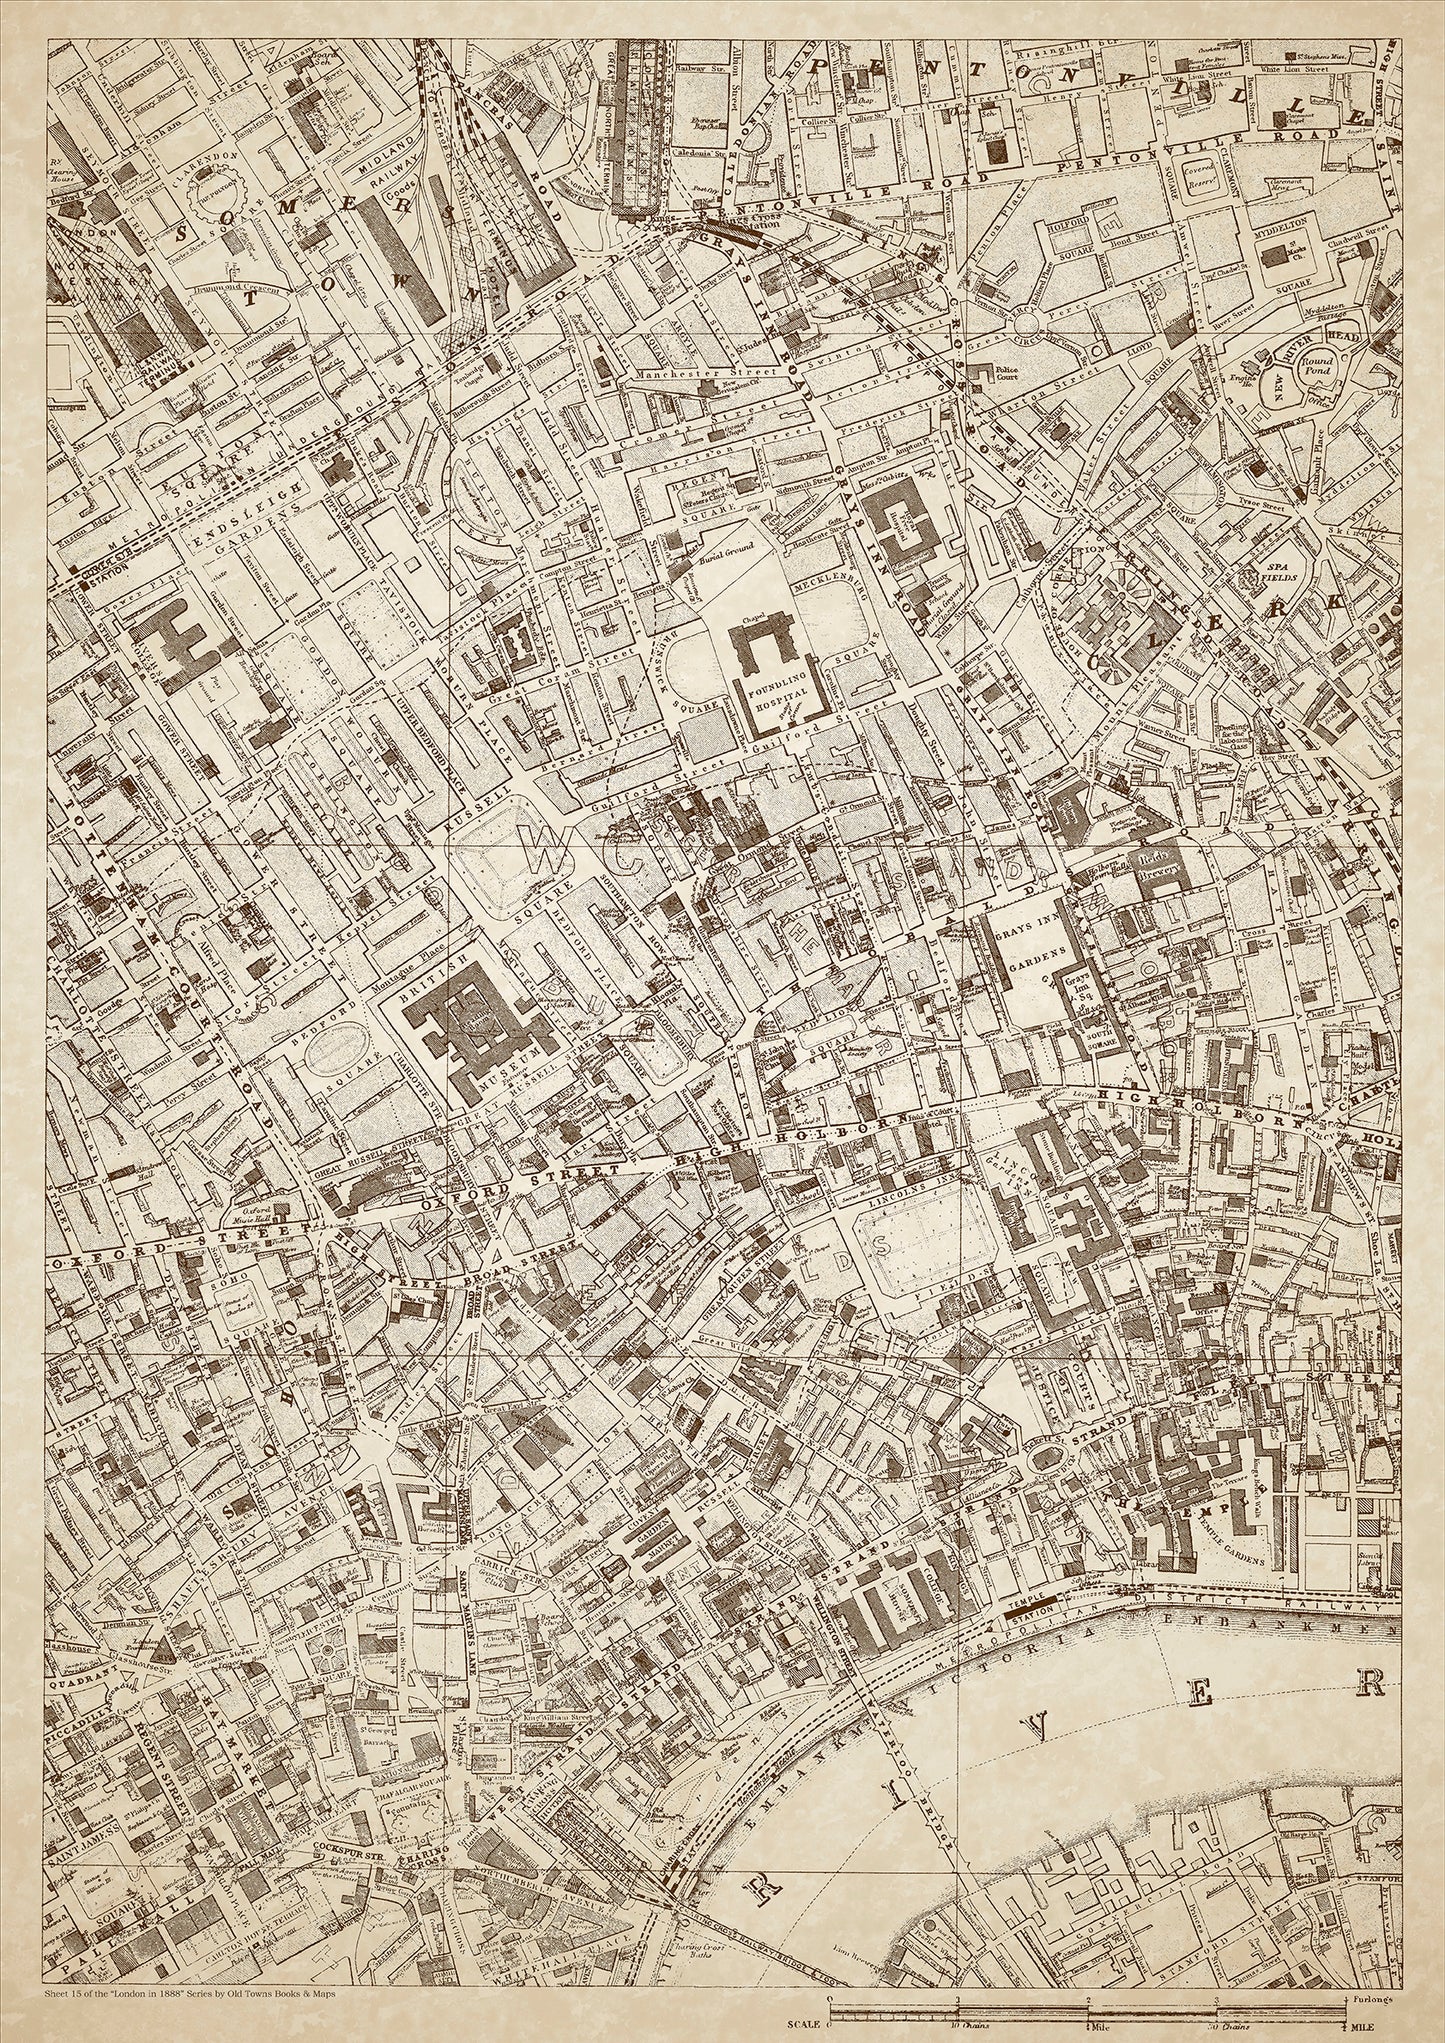 London in 1888 Series - showing Somers Town, Clerkenwell, Covent Garden - sheet 15